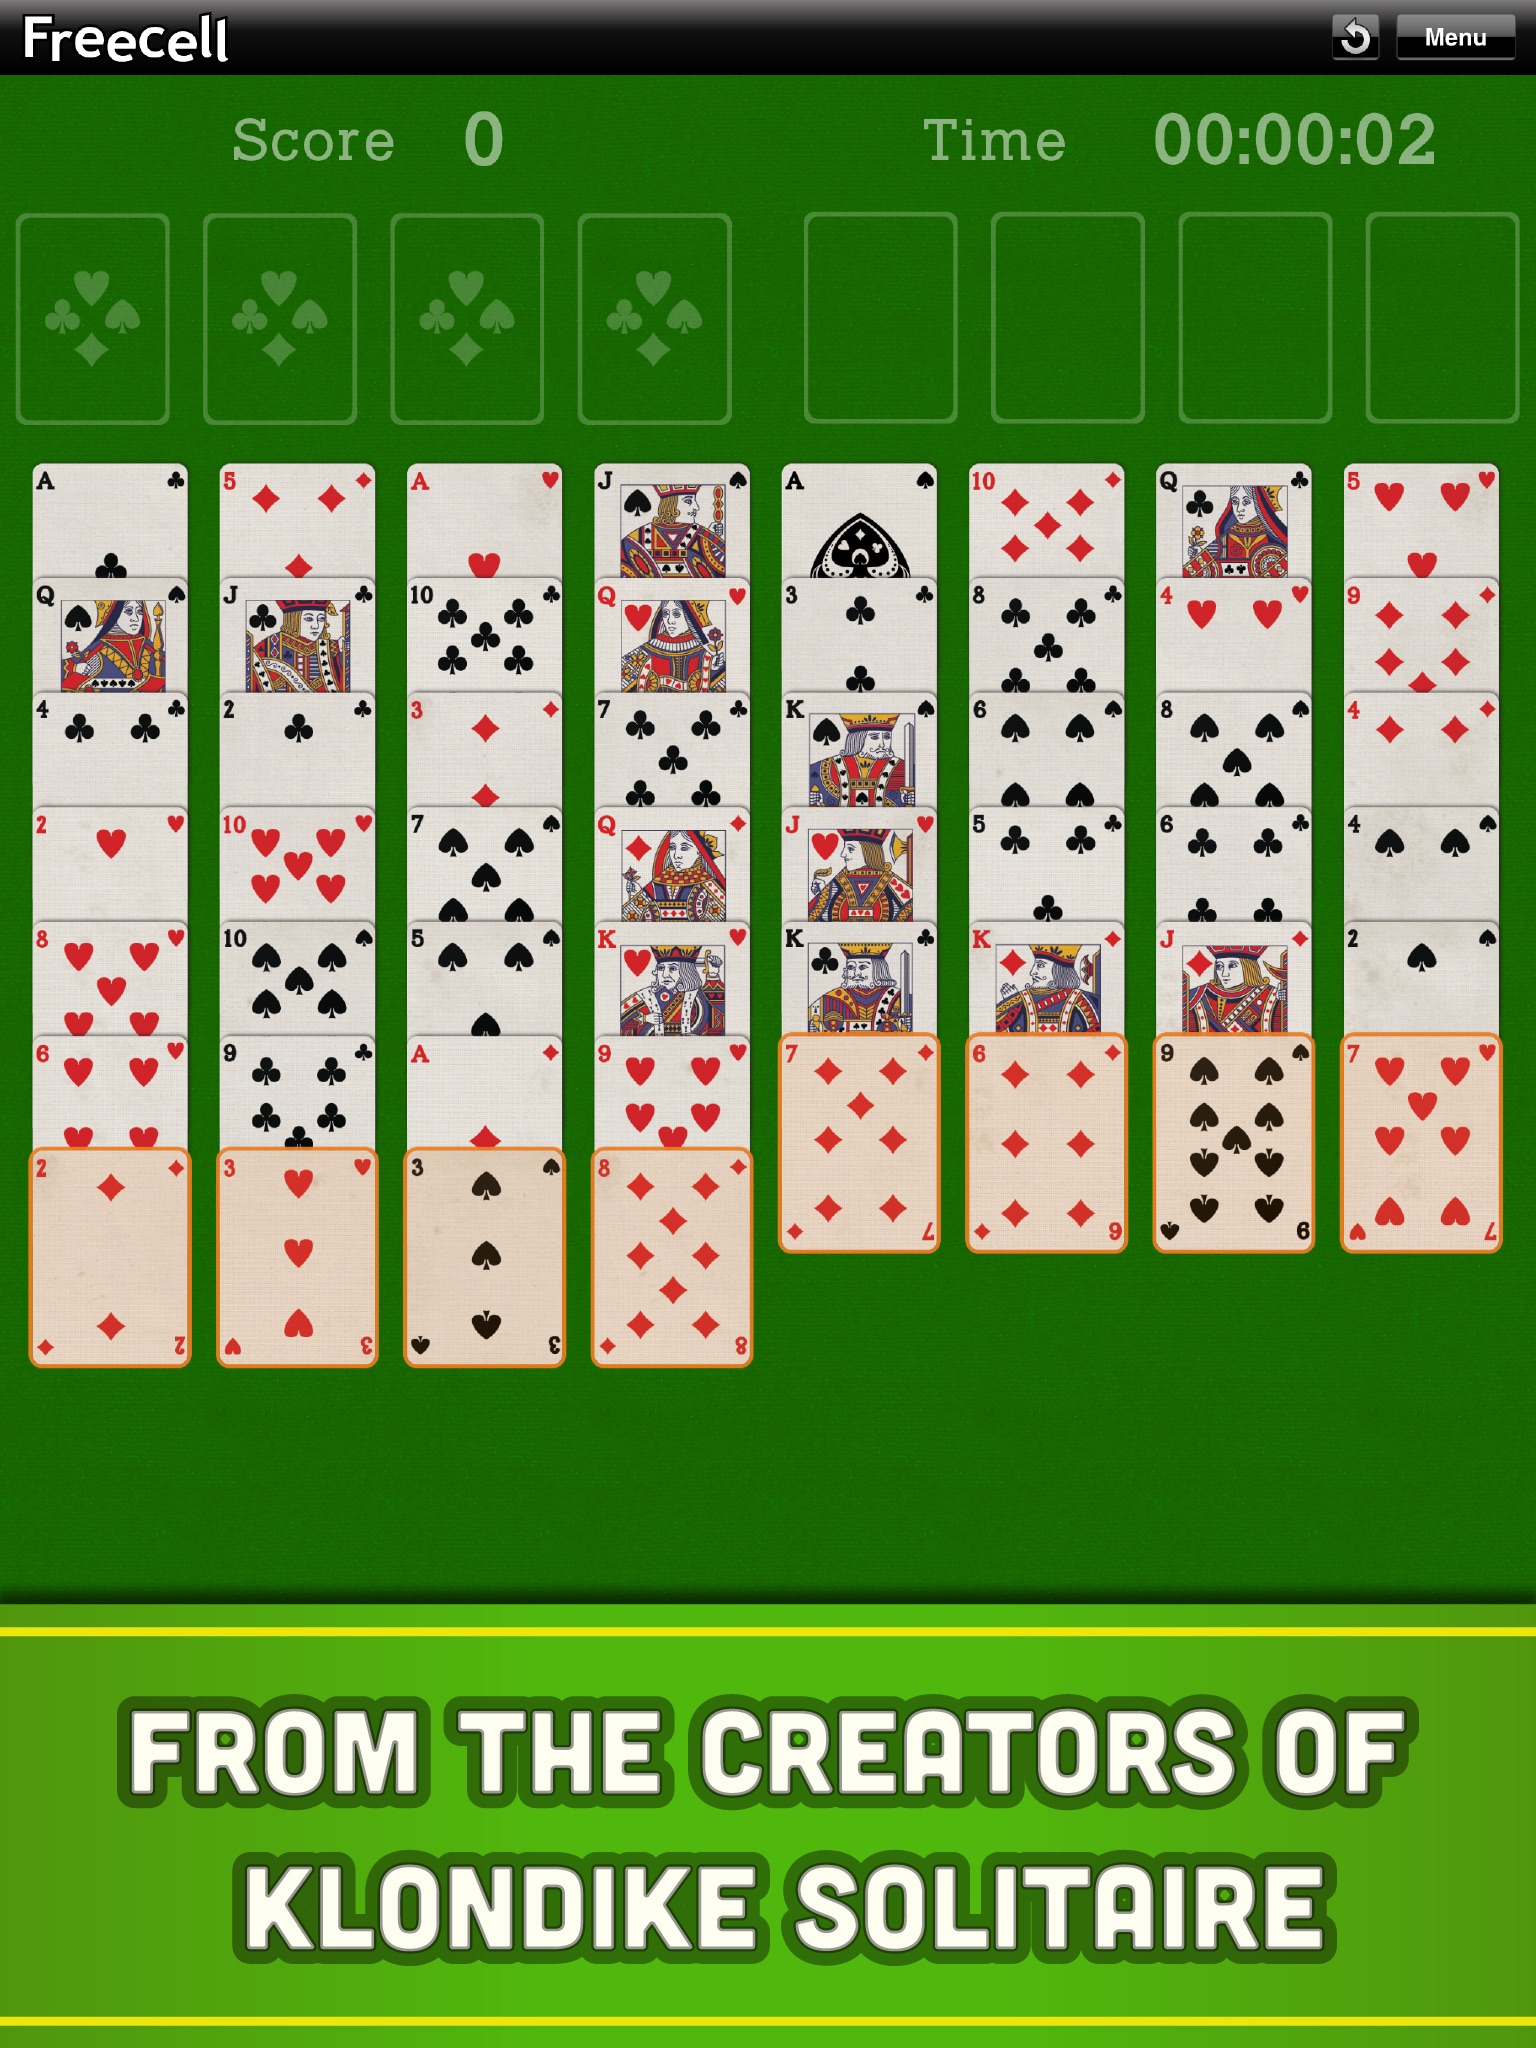 Freecell - Classic Solitaire screenshot 2